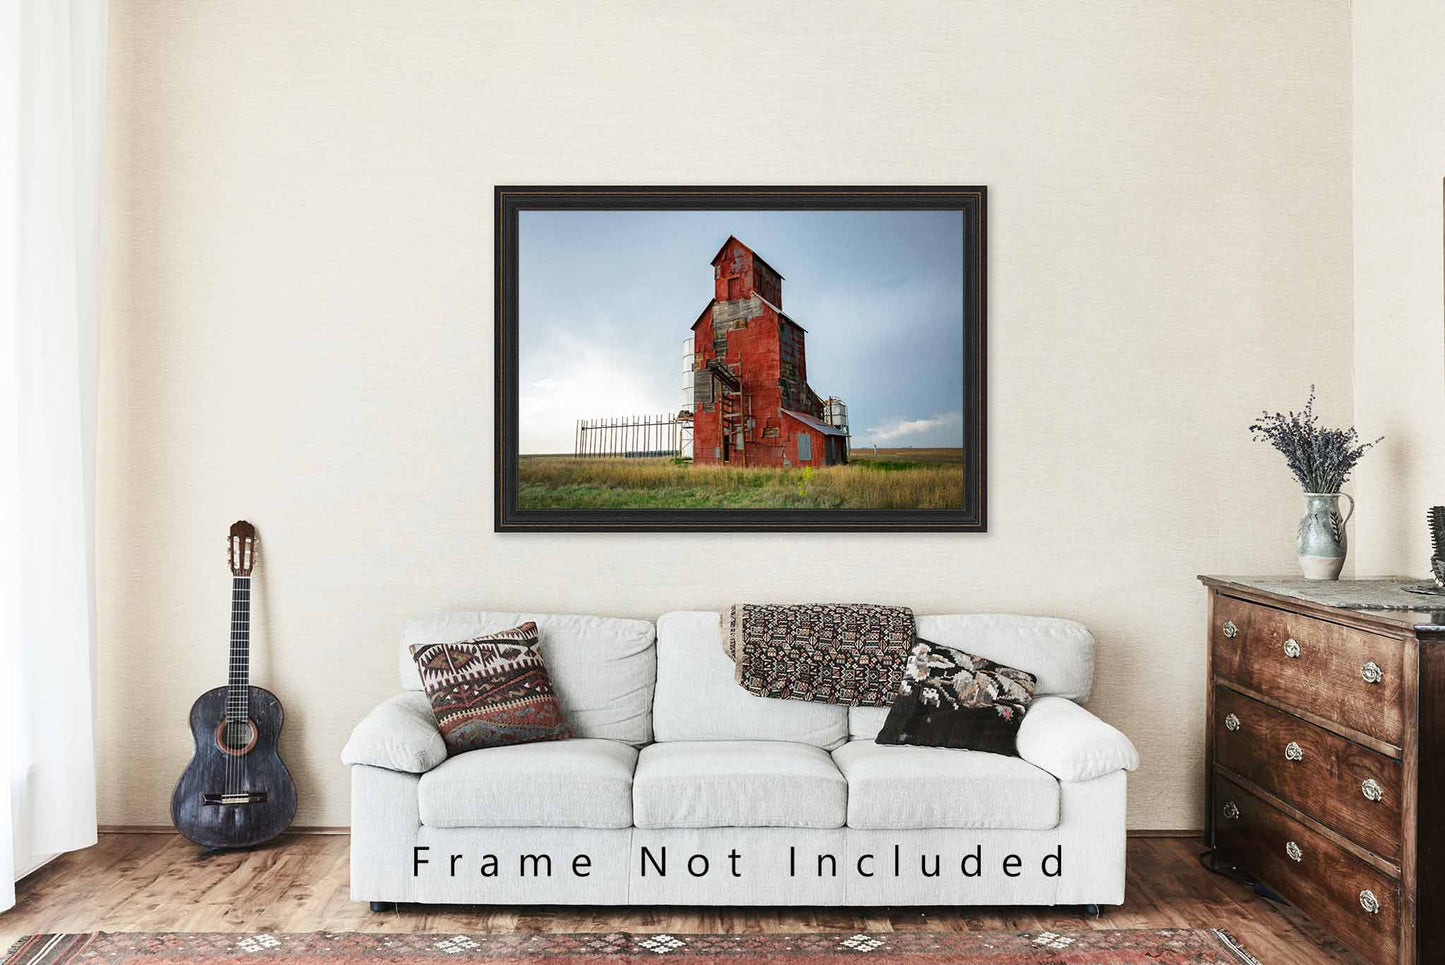 Country Photo Print | Abandoned Wooden Grain Elevator Picture | Texas Wall Art | Farm Photography | Farmhouse Decor